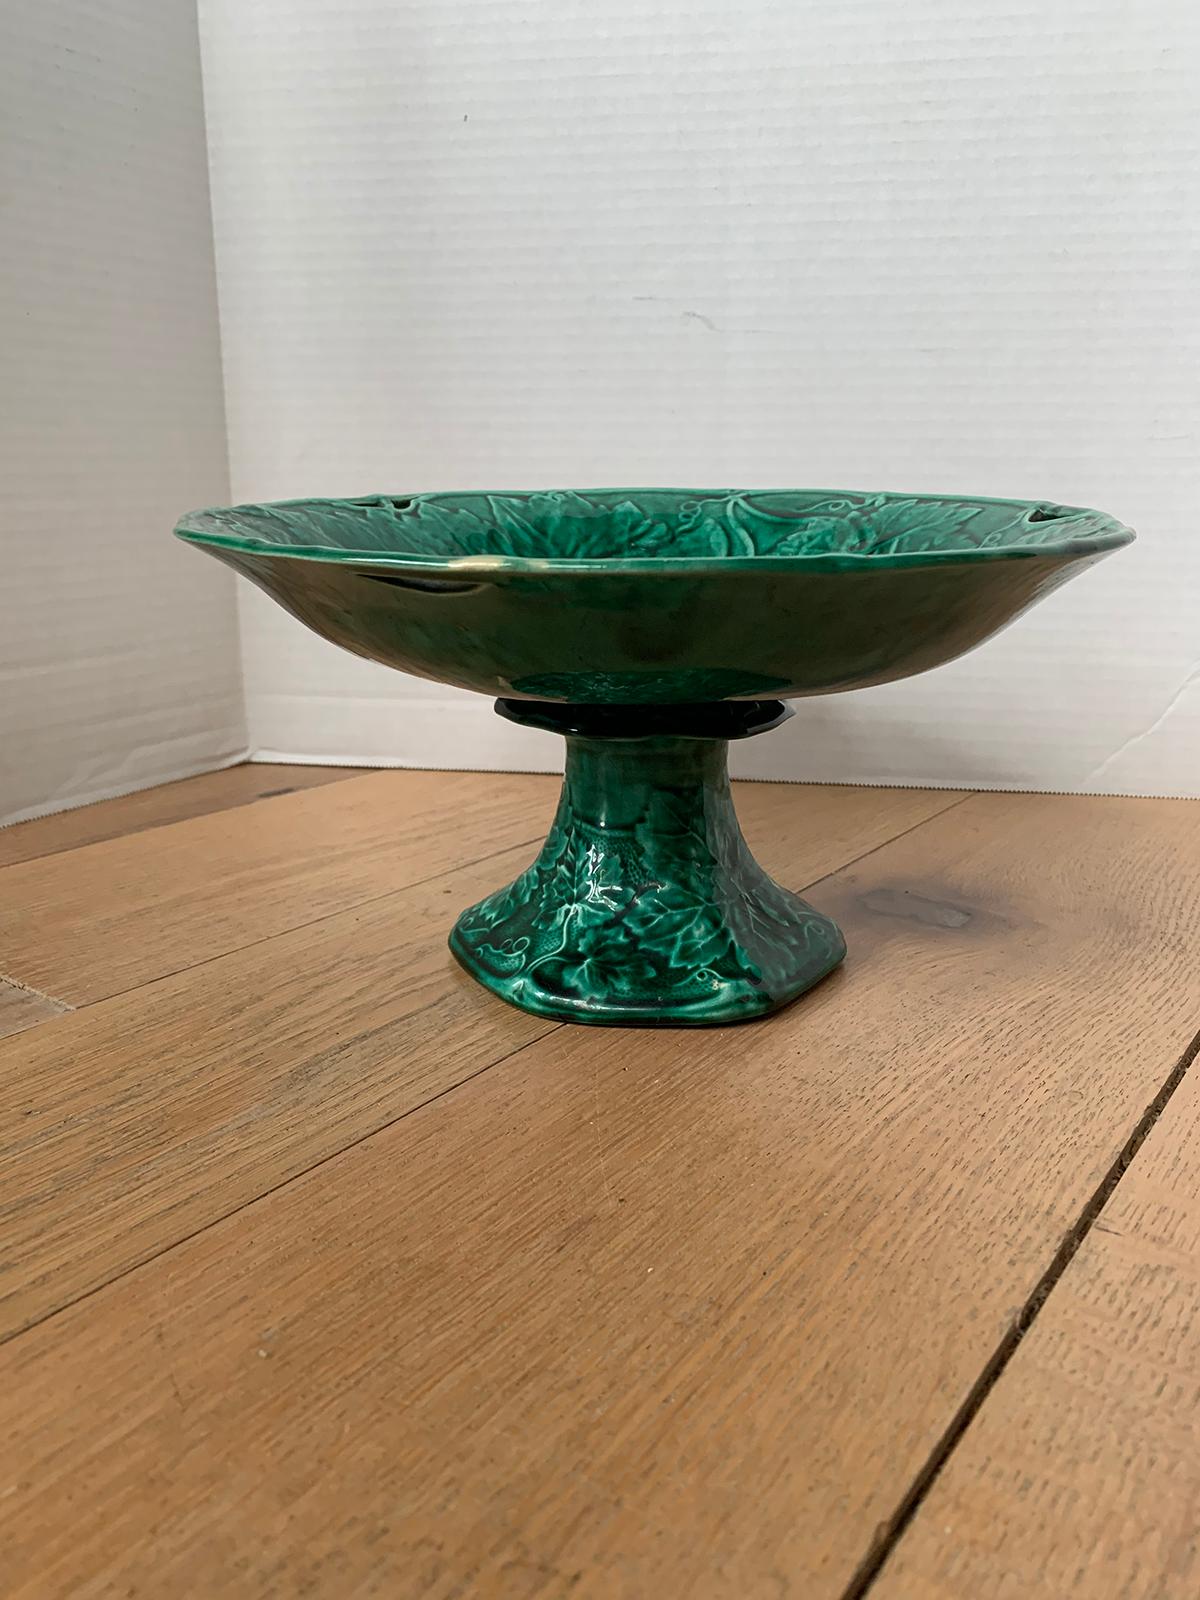 19th century green glazed Majolica pottery compote, unmarked, English or French.